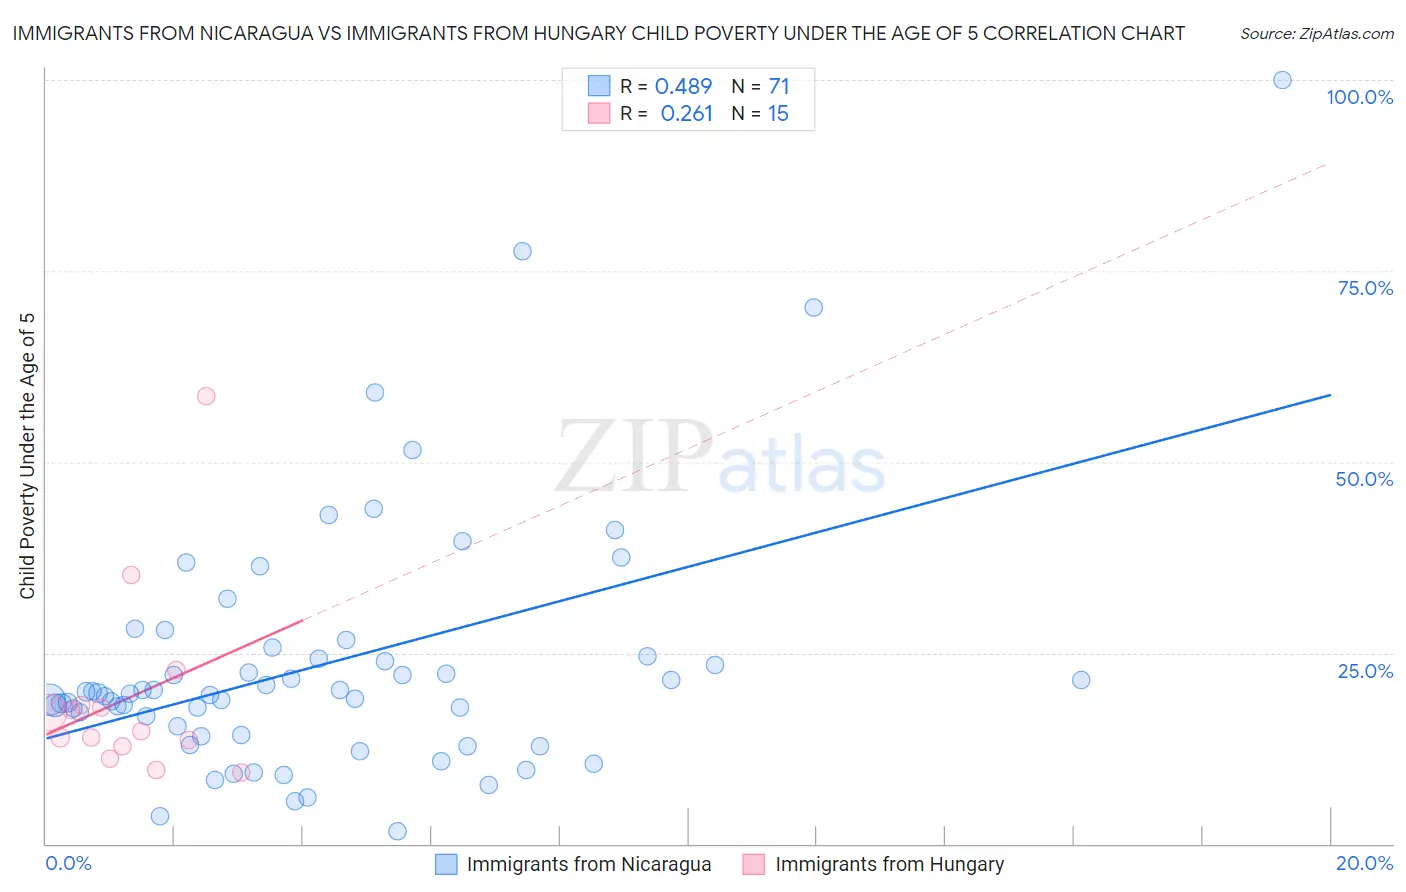 Immigrants from Nicaragua vs Immigrants from Hungary Child Poverty Under the Age of 5